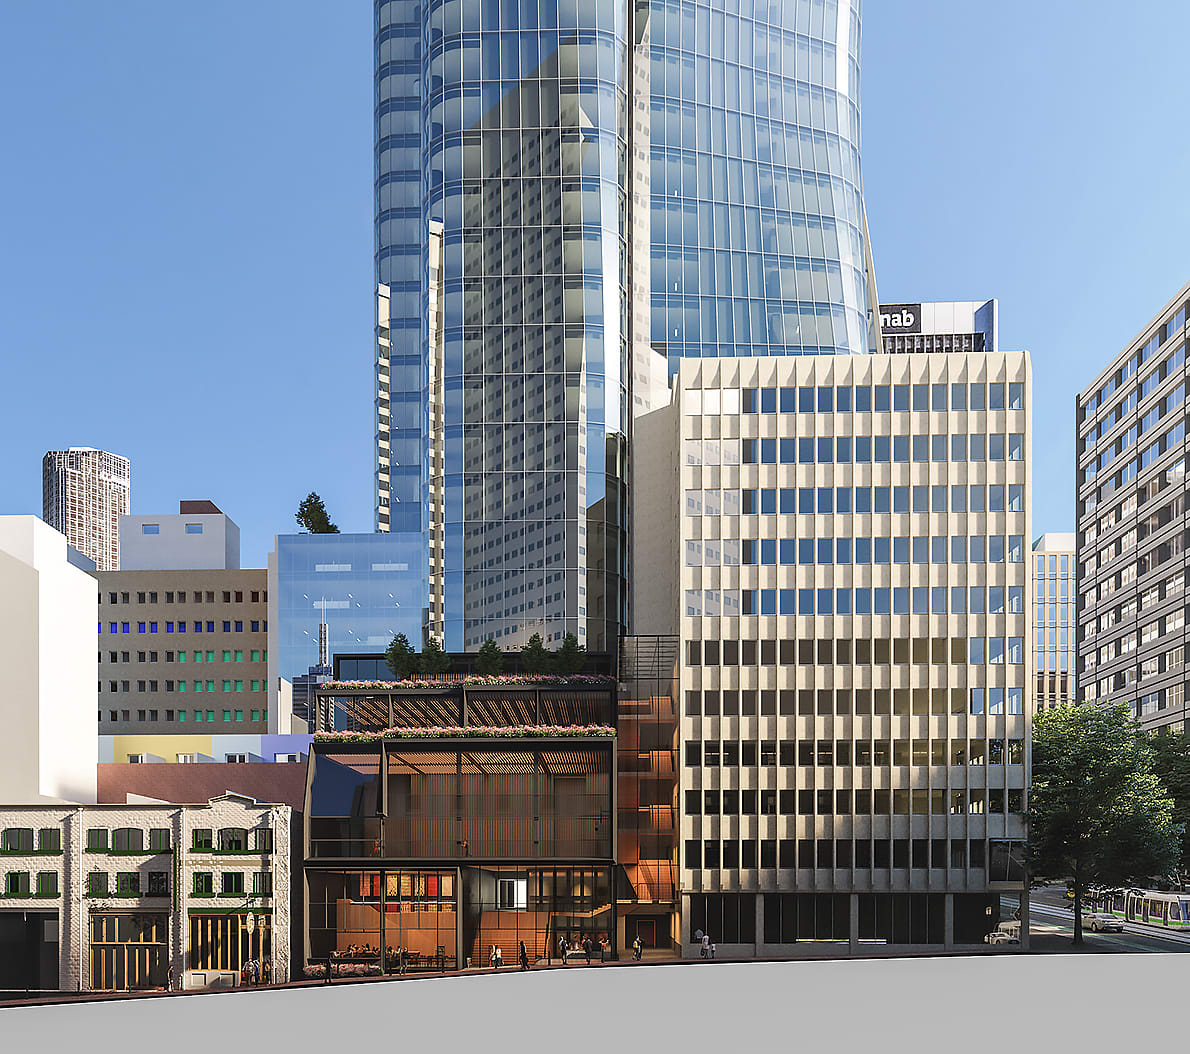 Cbus Property Submits Planning Application for its Landmark 435 Bourke Street Site